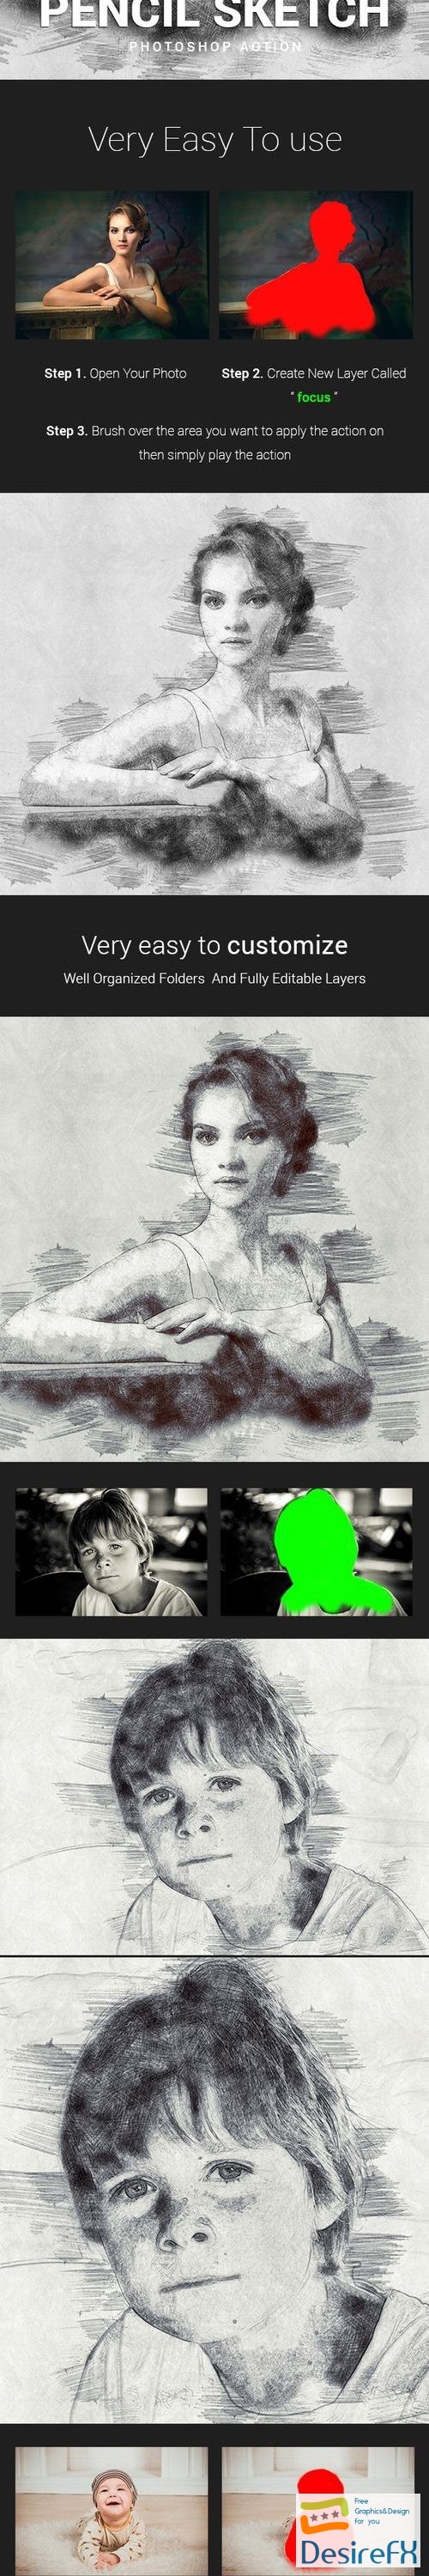 Pencil Sketch Photoshop Action Photo Effects 21683660